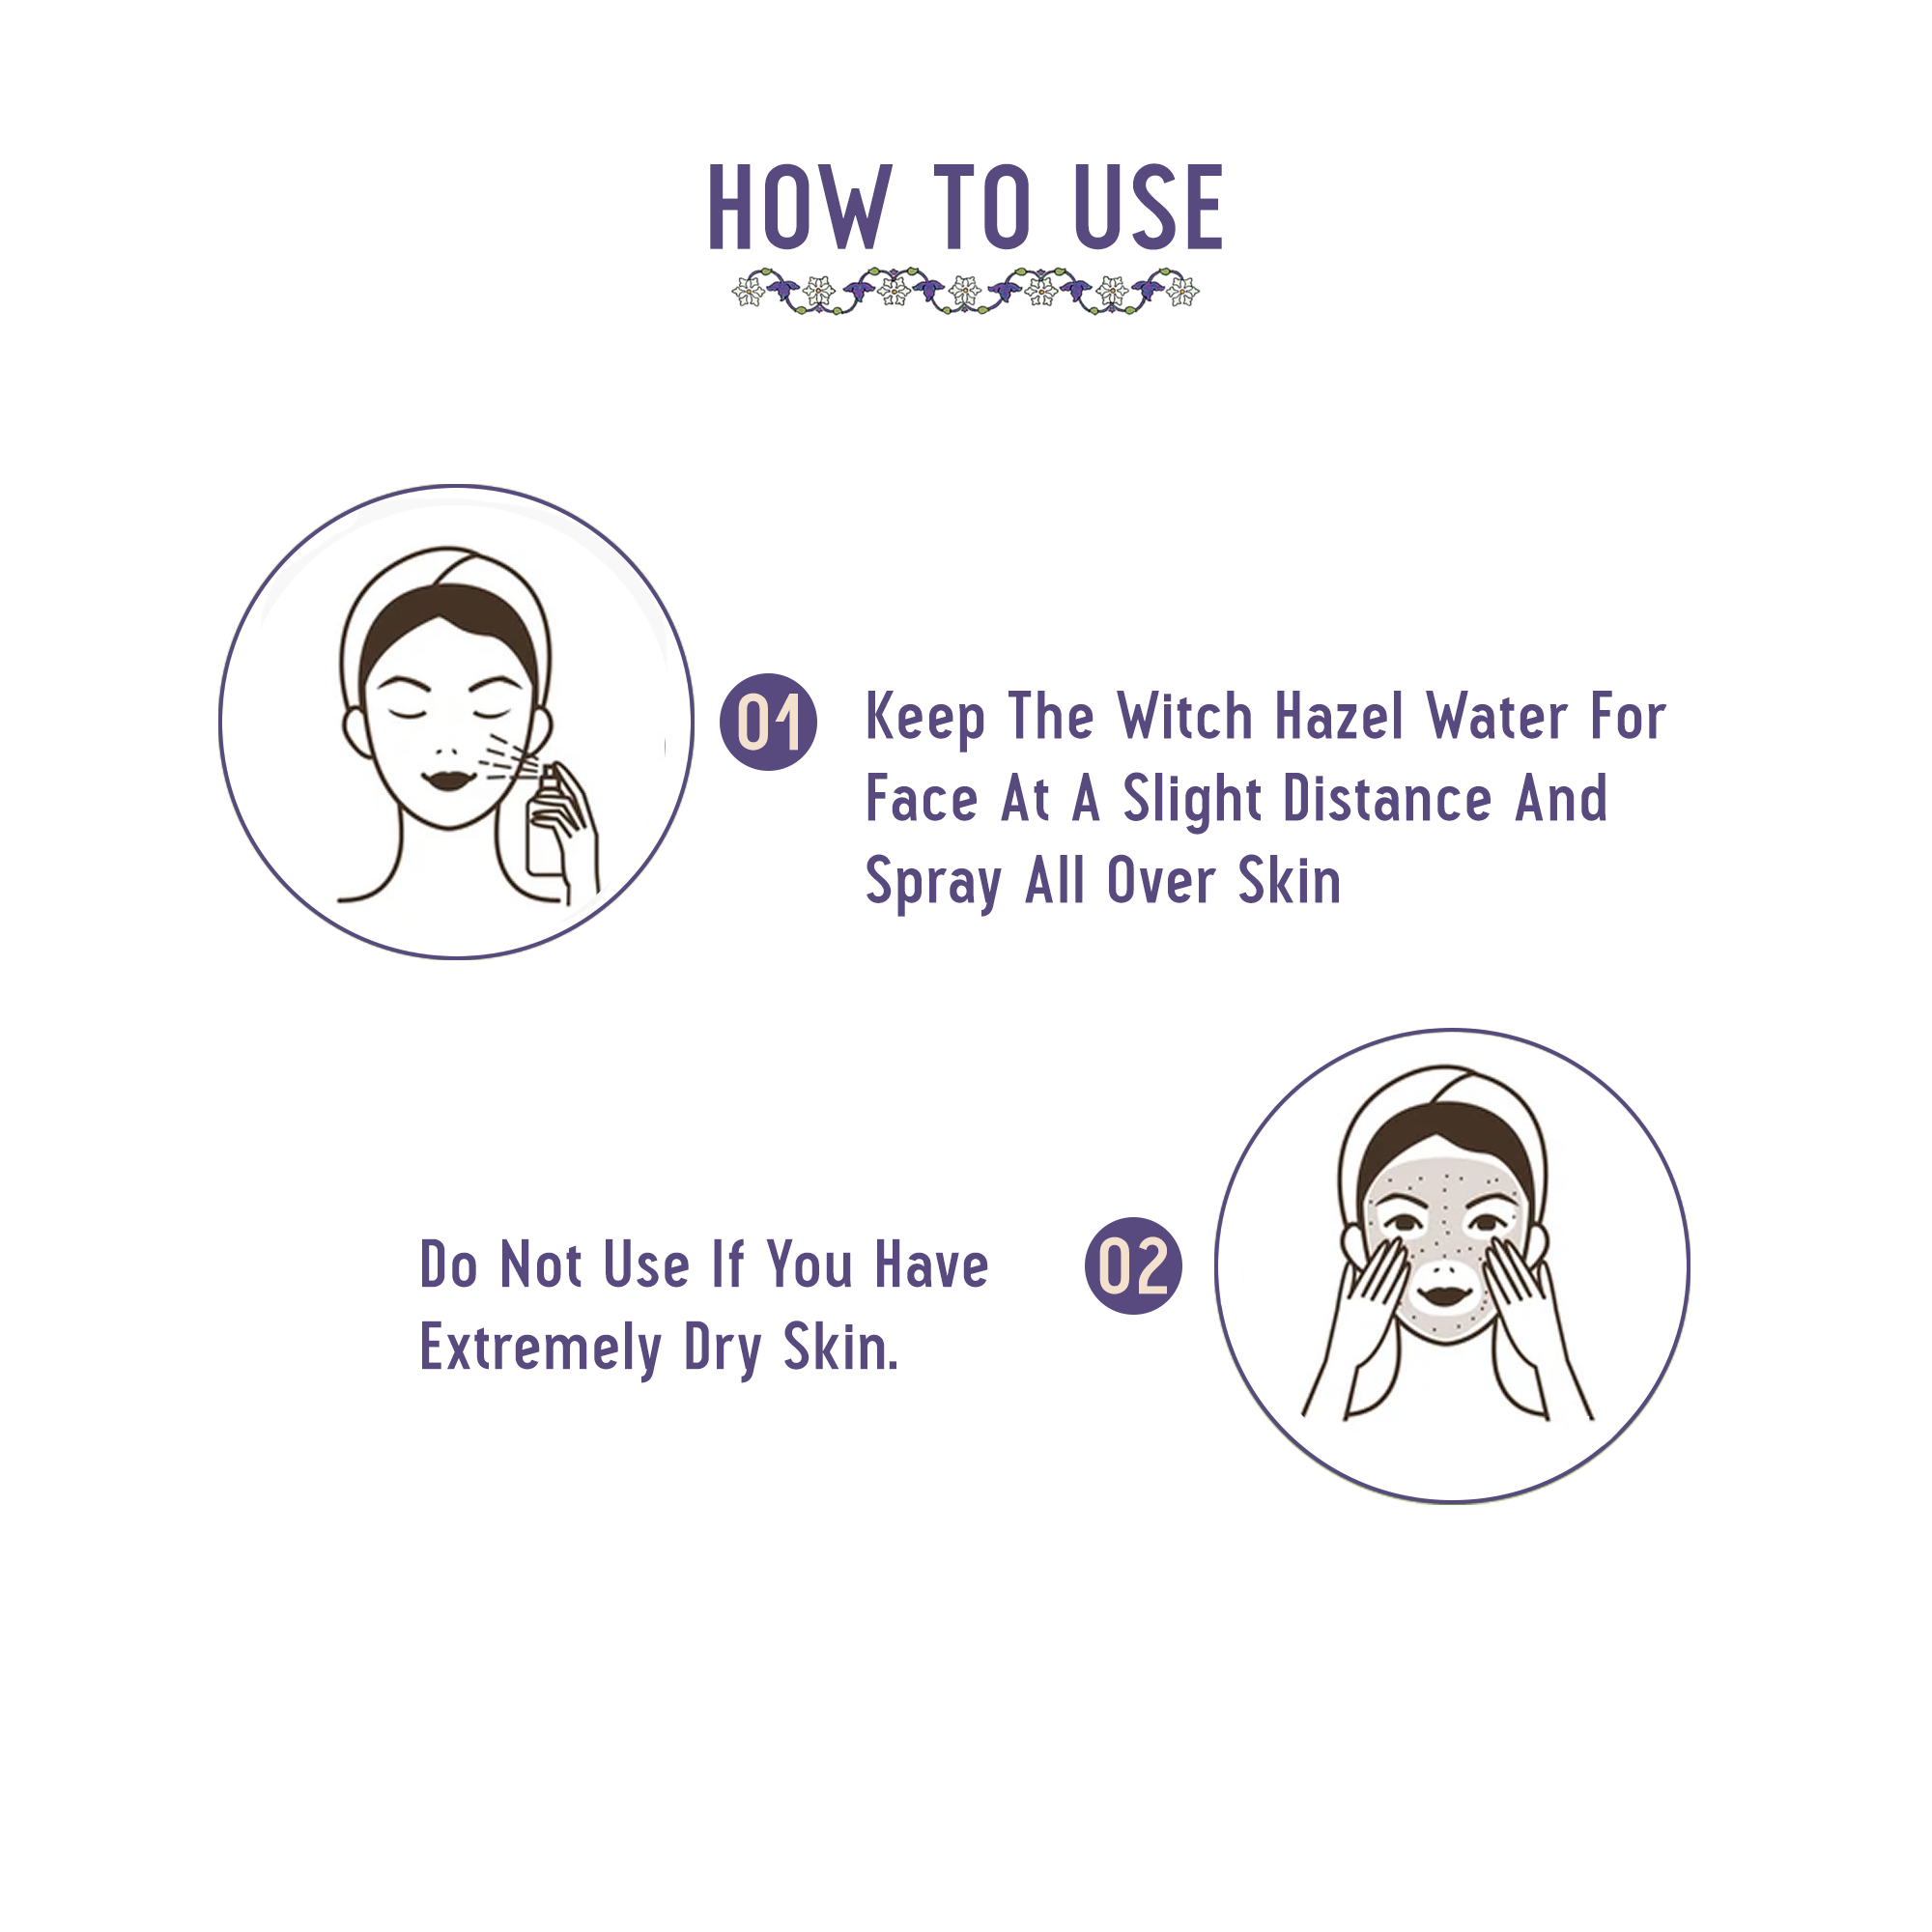 How to use lavender water